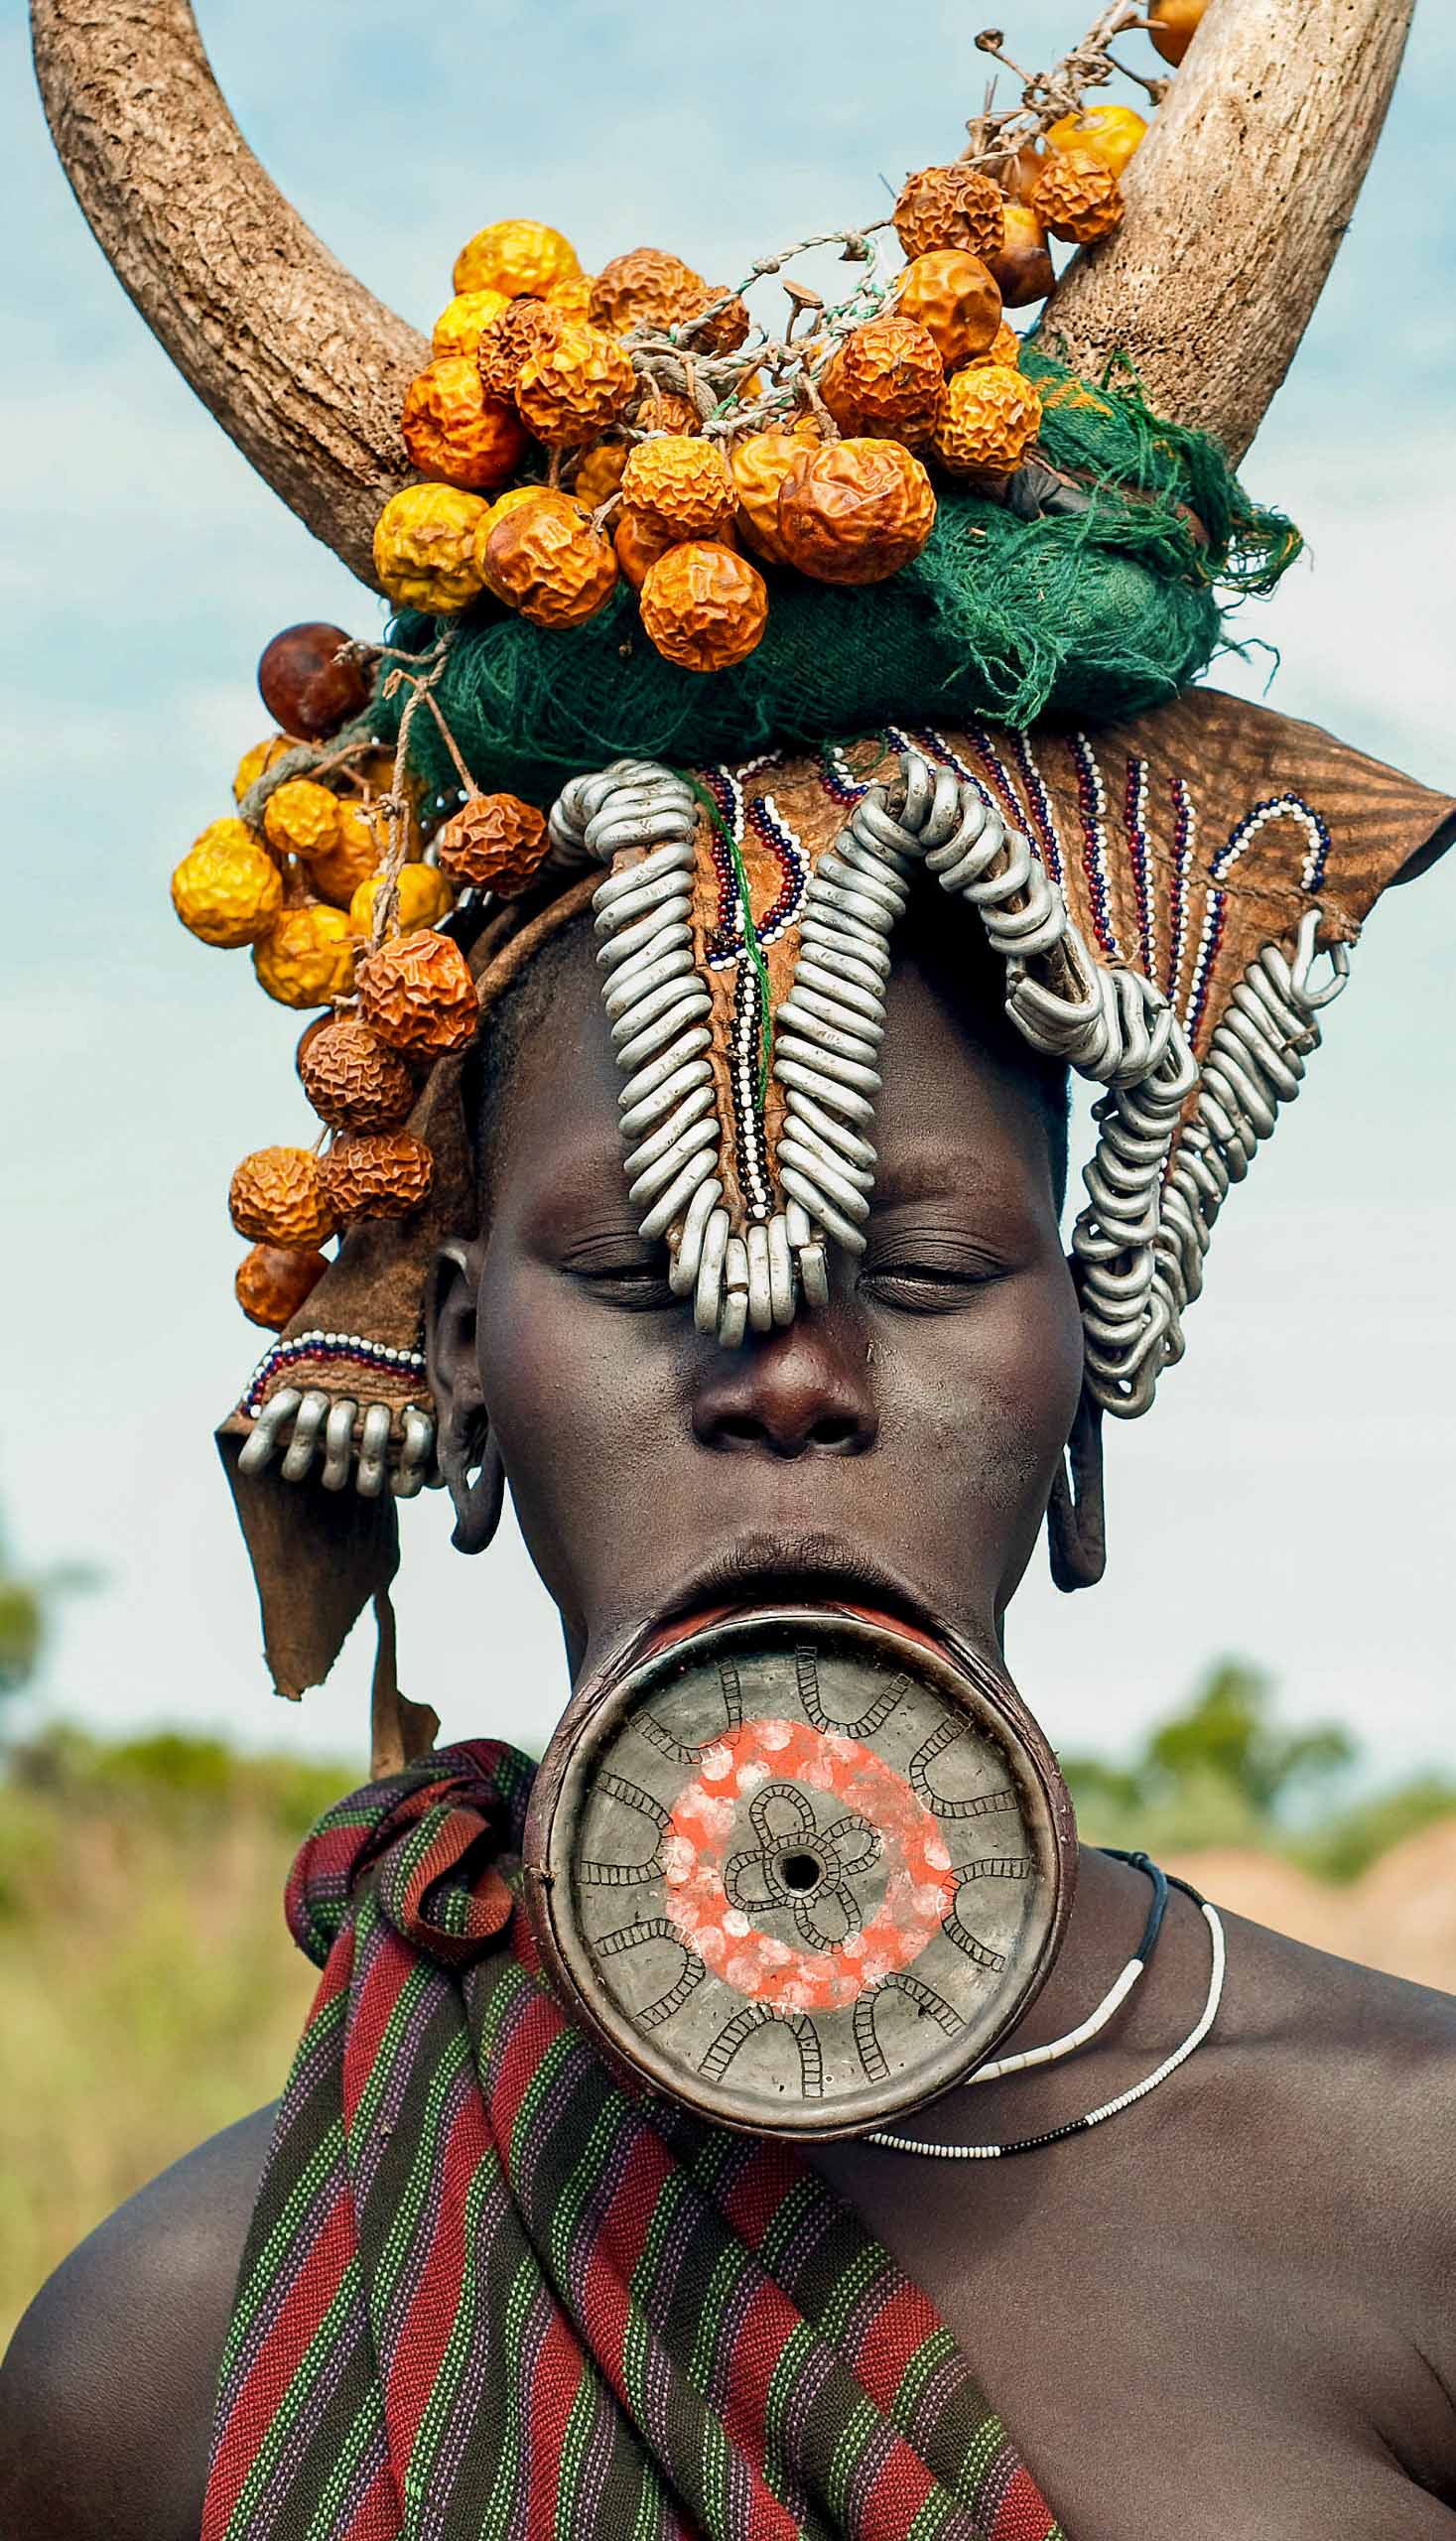 Woman from the Mursi tribe.